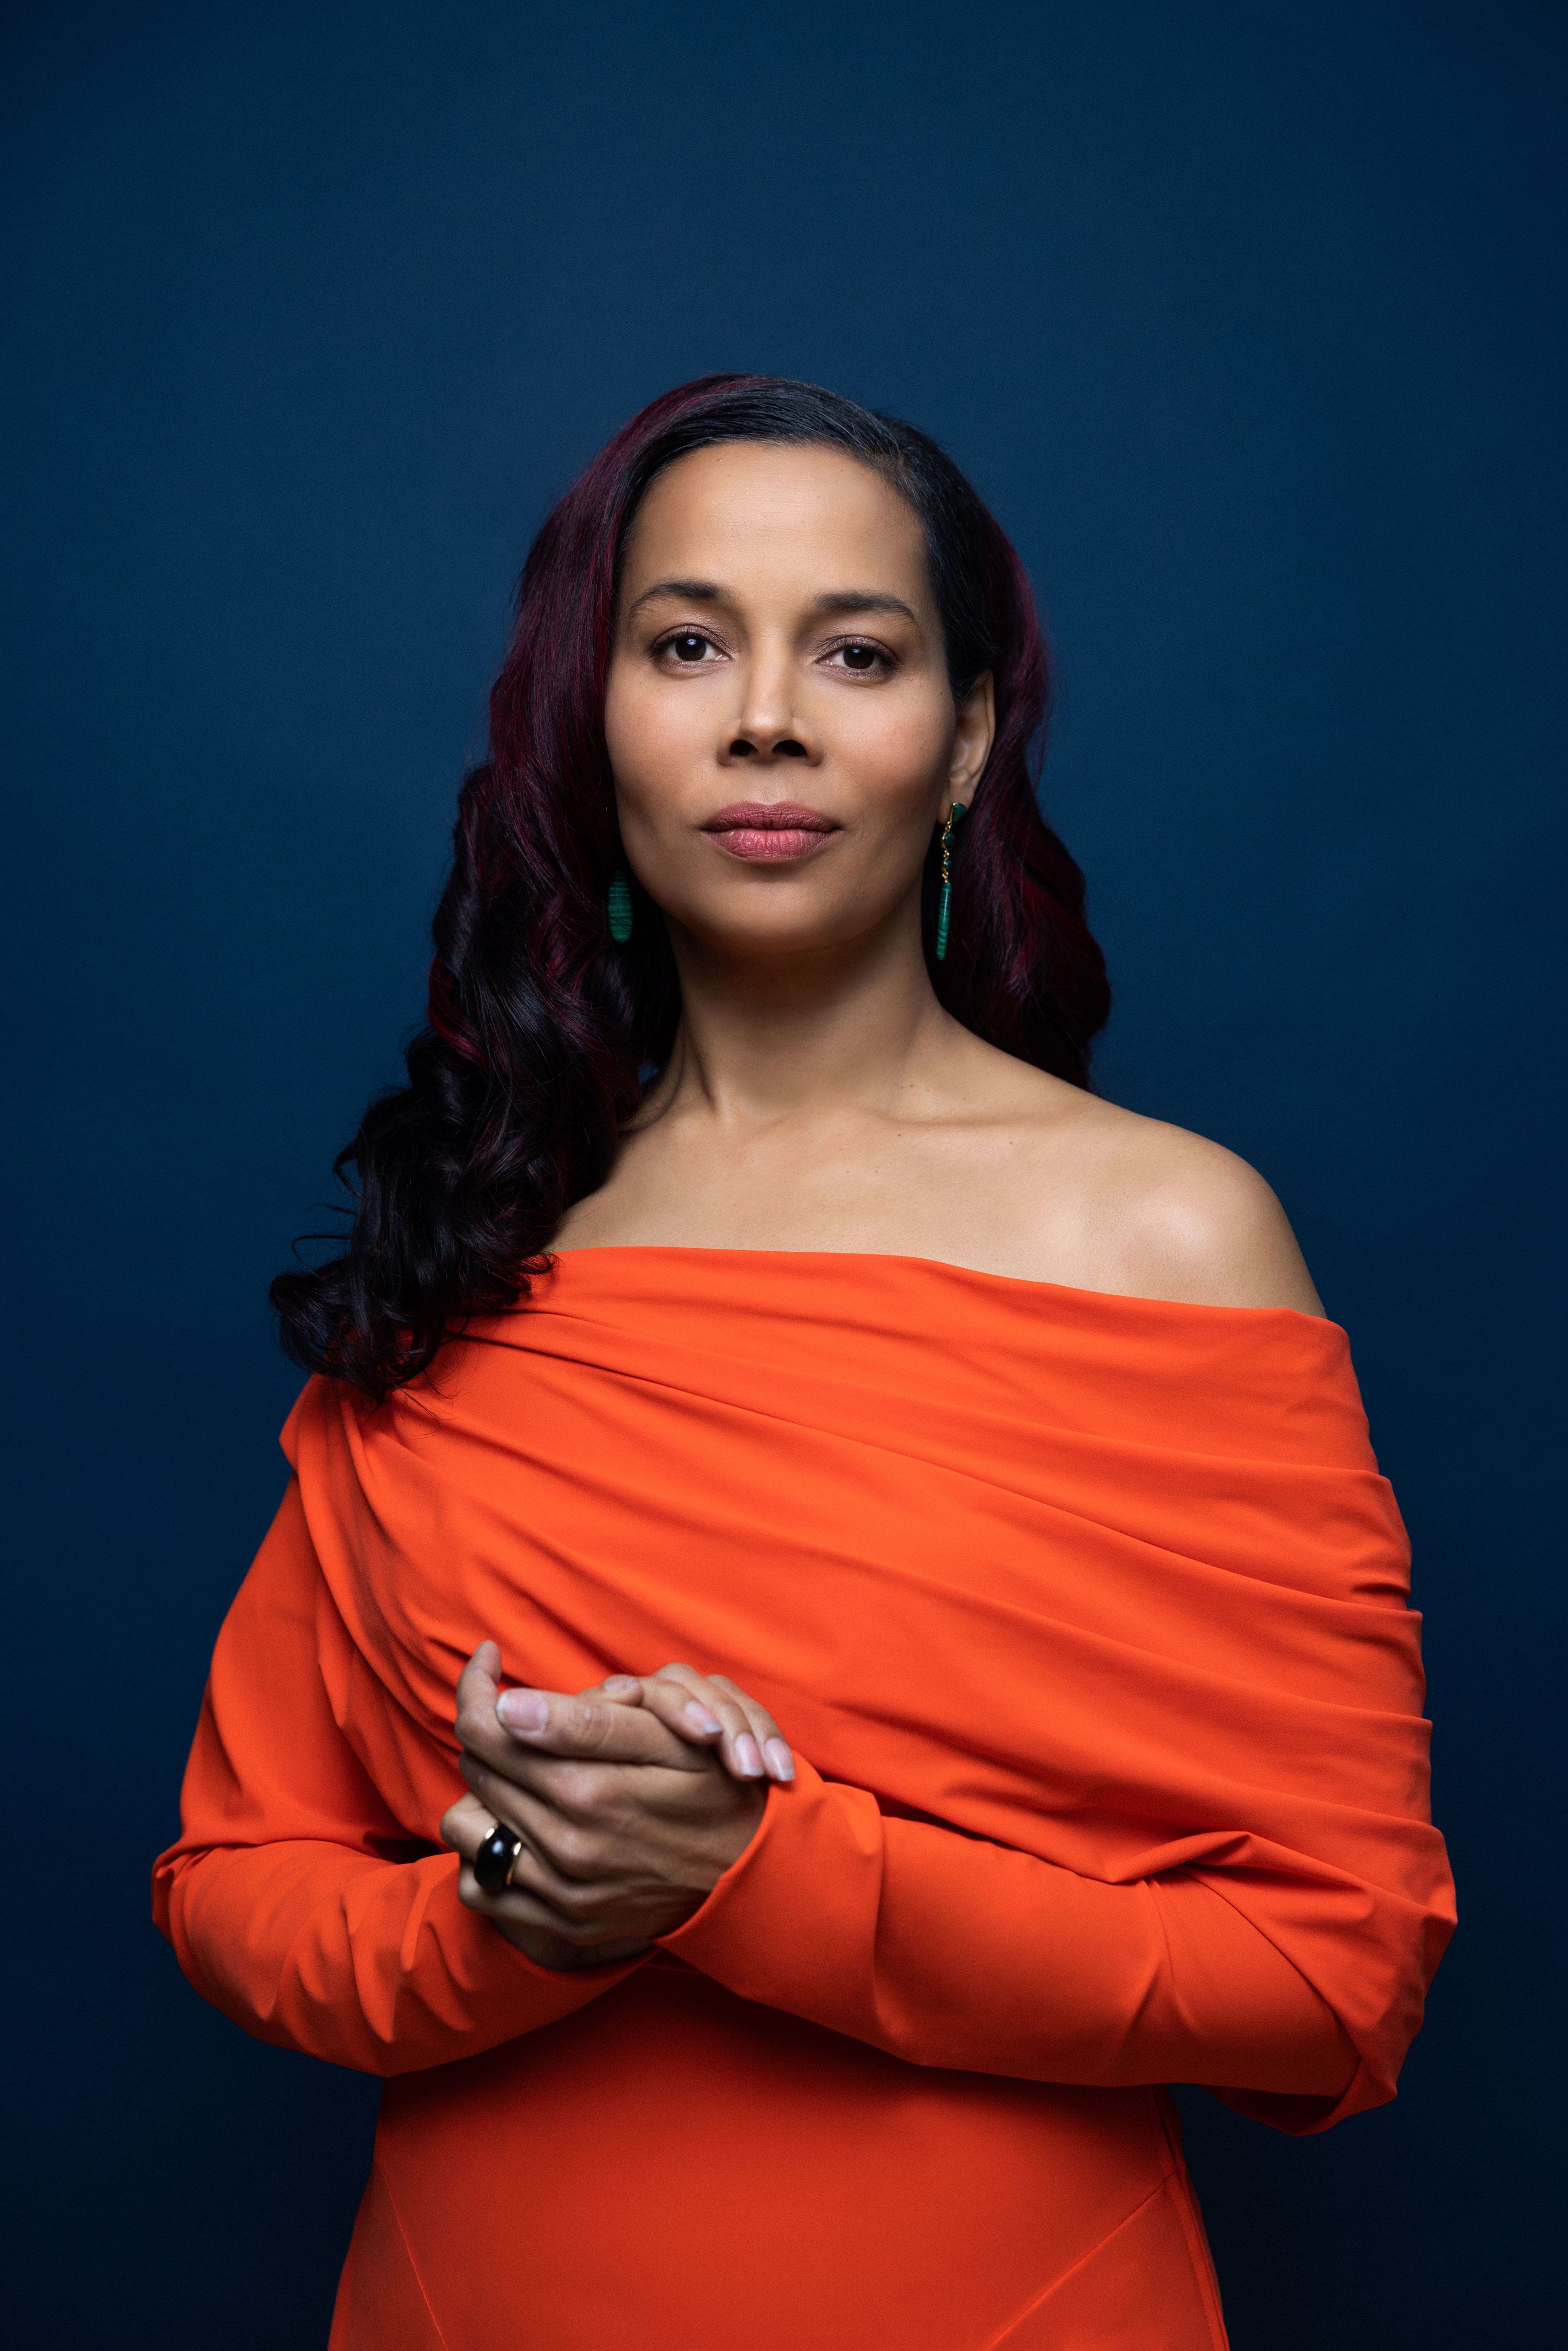 Rhiannon Giddens on her first album of original songs and winning